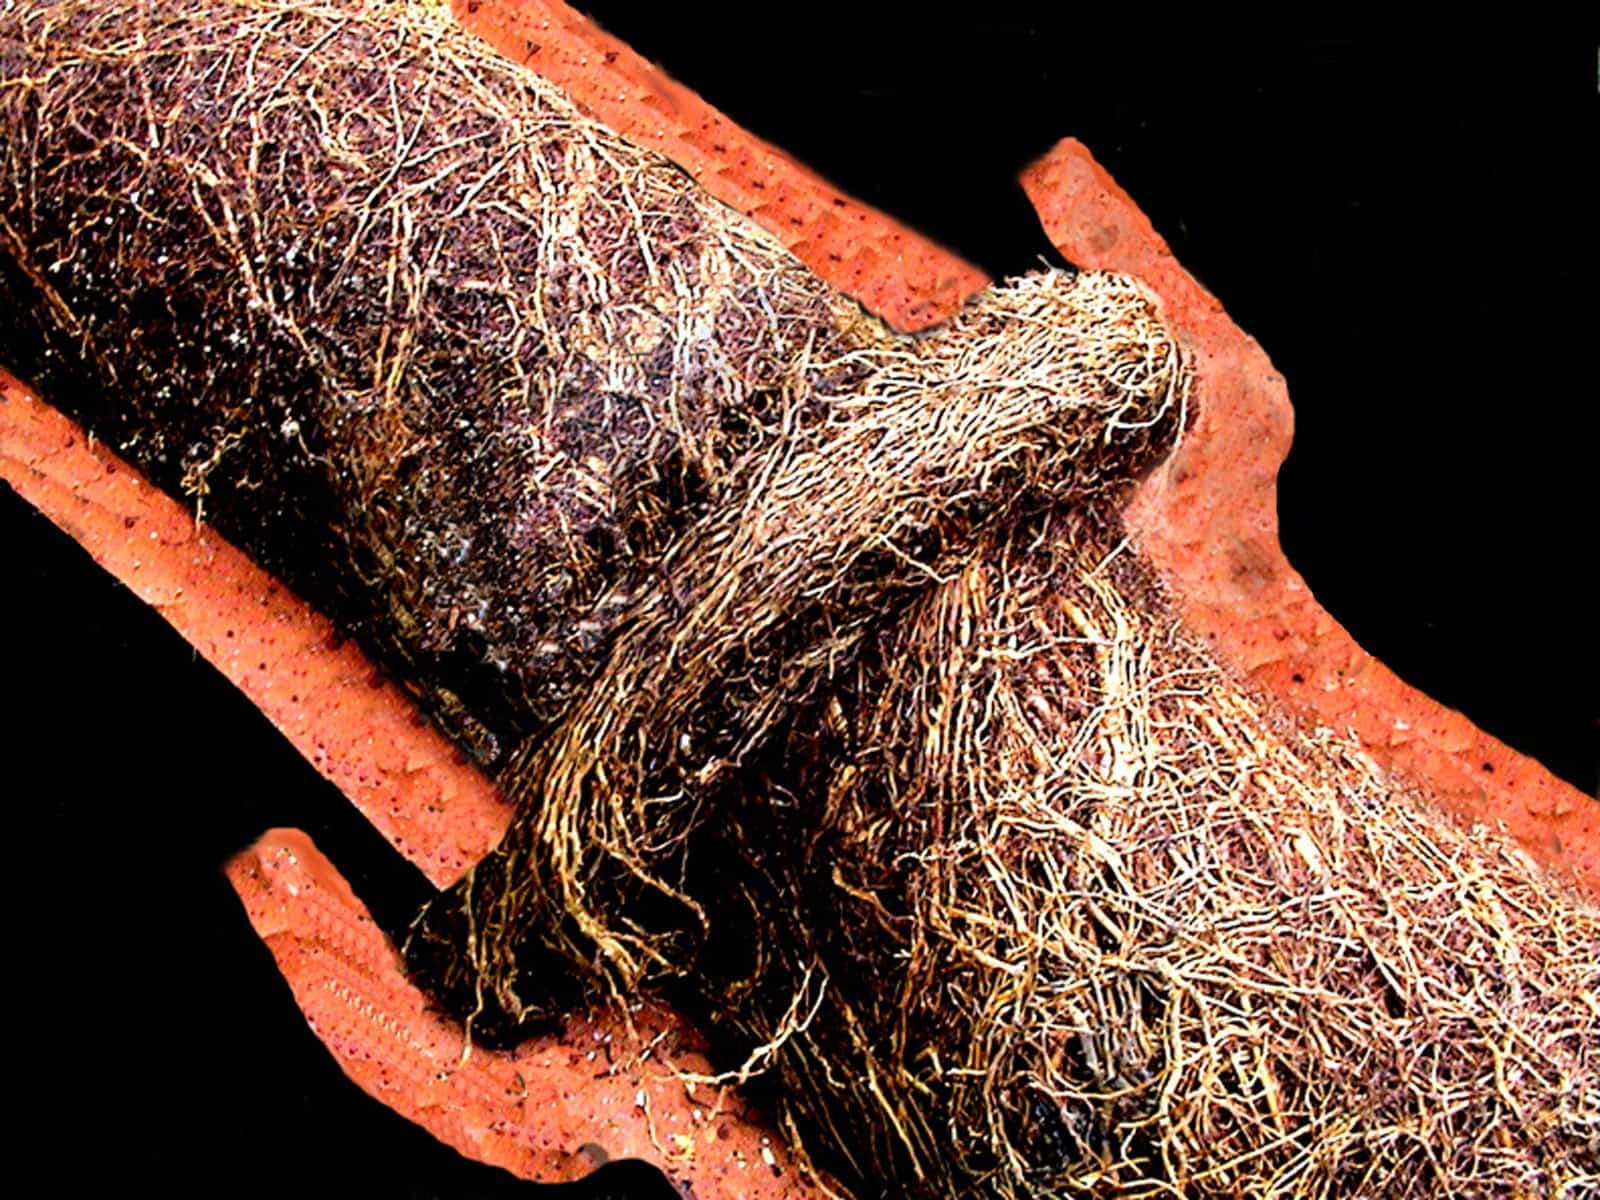 Roots inside of clay sewer pipes.